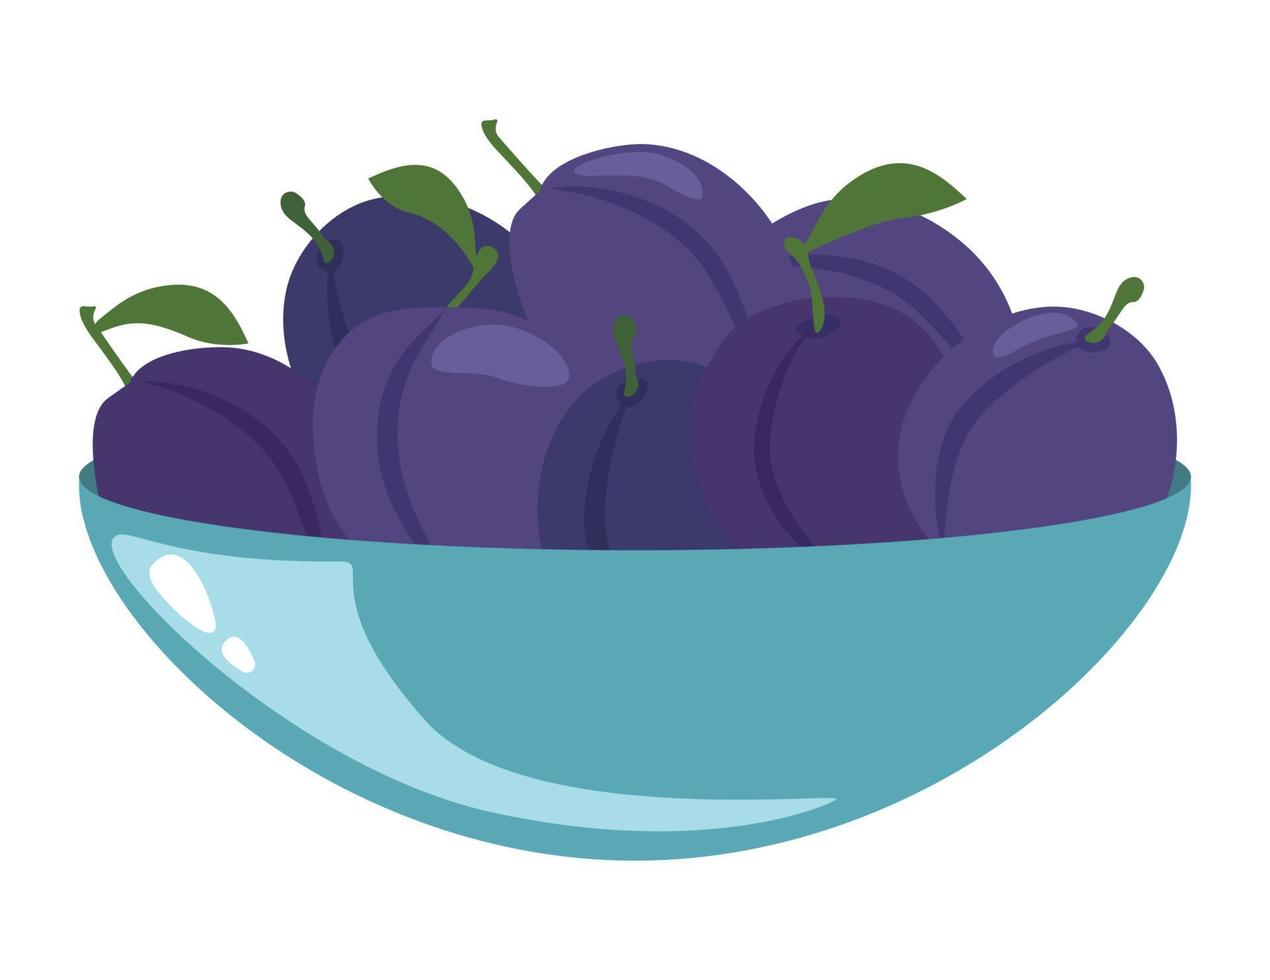 Plums in a bowl. Vector illustration isolated on white background